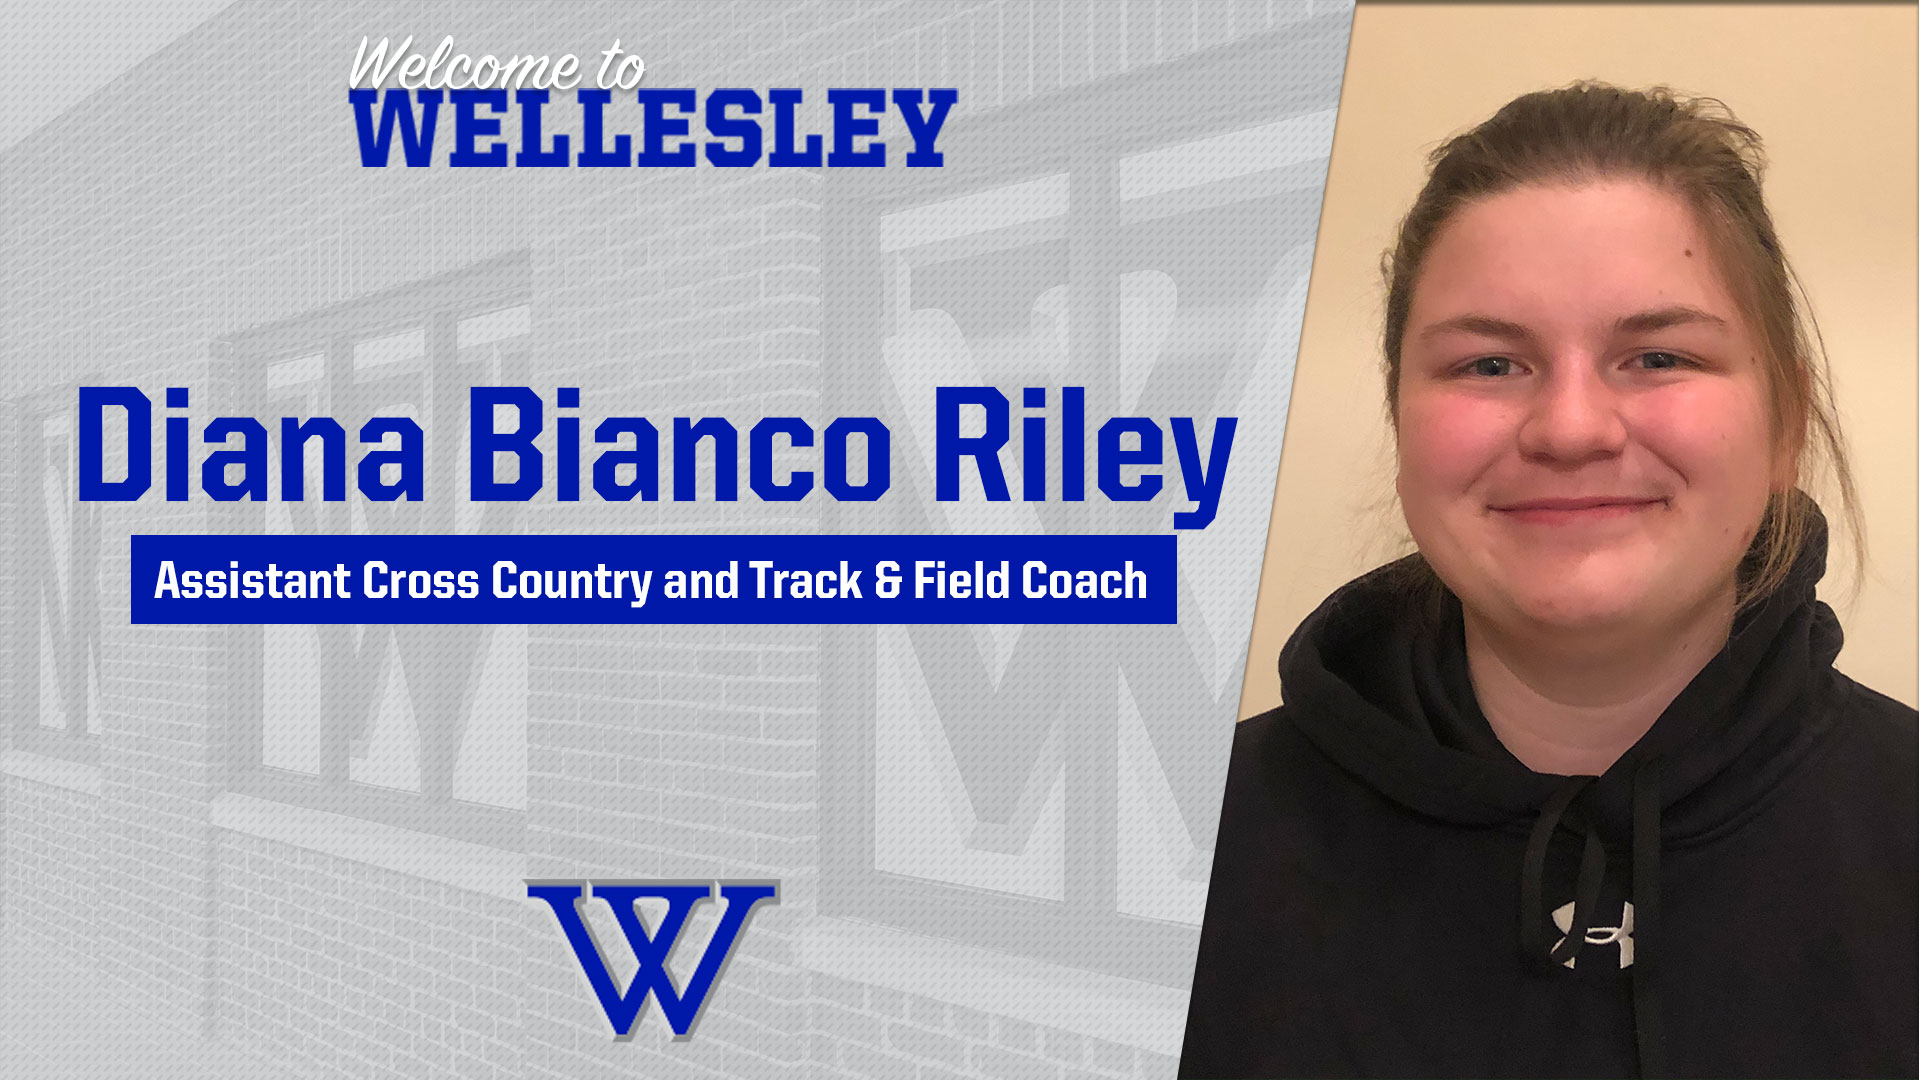 Wellesley Cross Country and Track & Field Announces the Hiring of Diana Bianco Riley